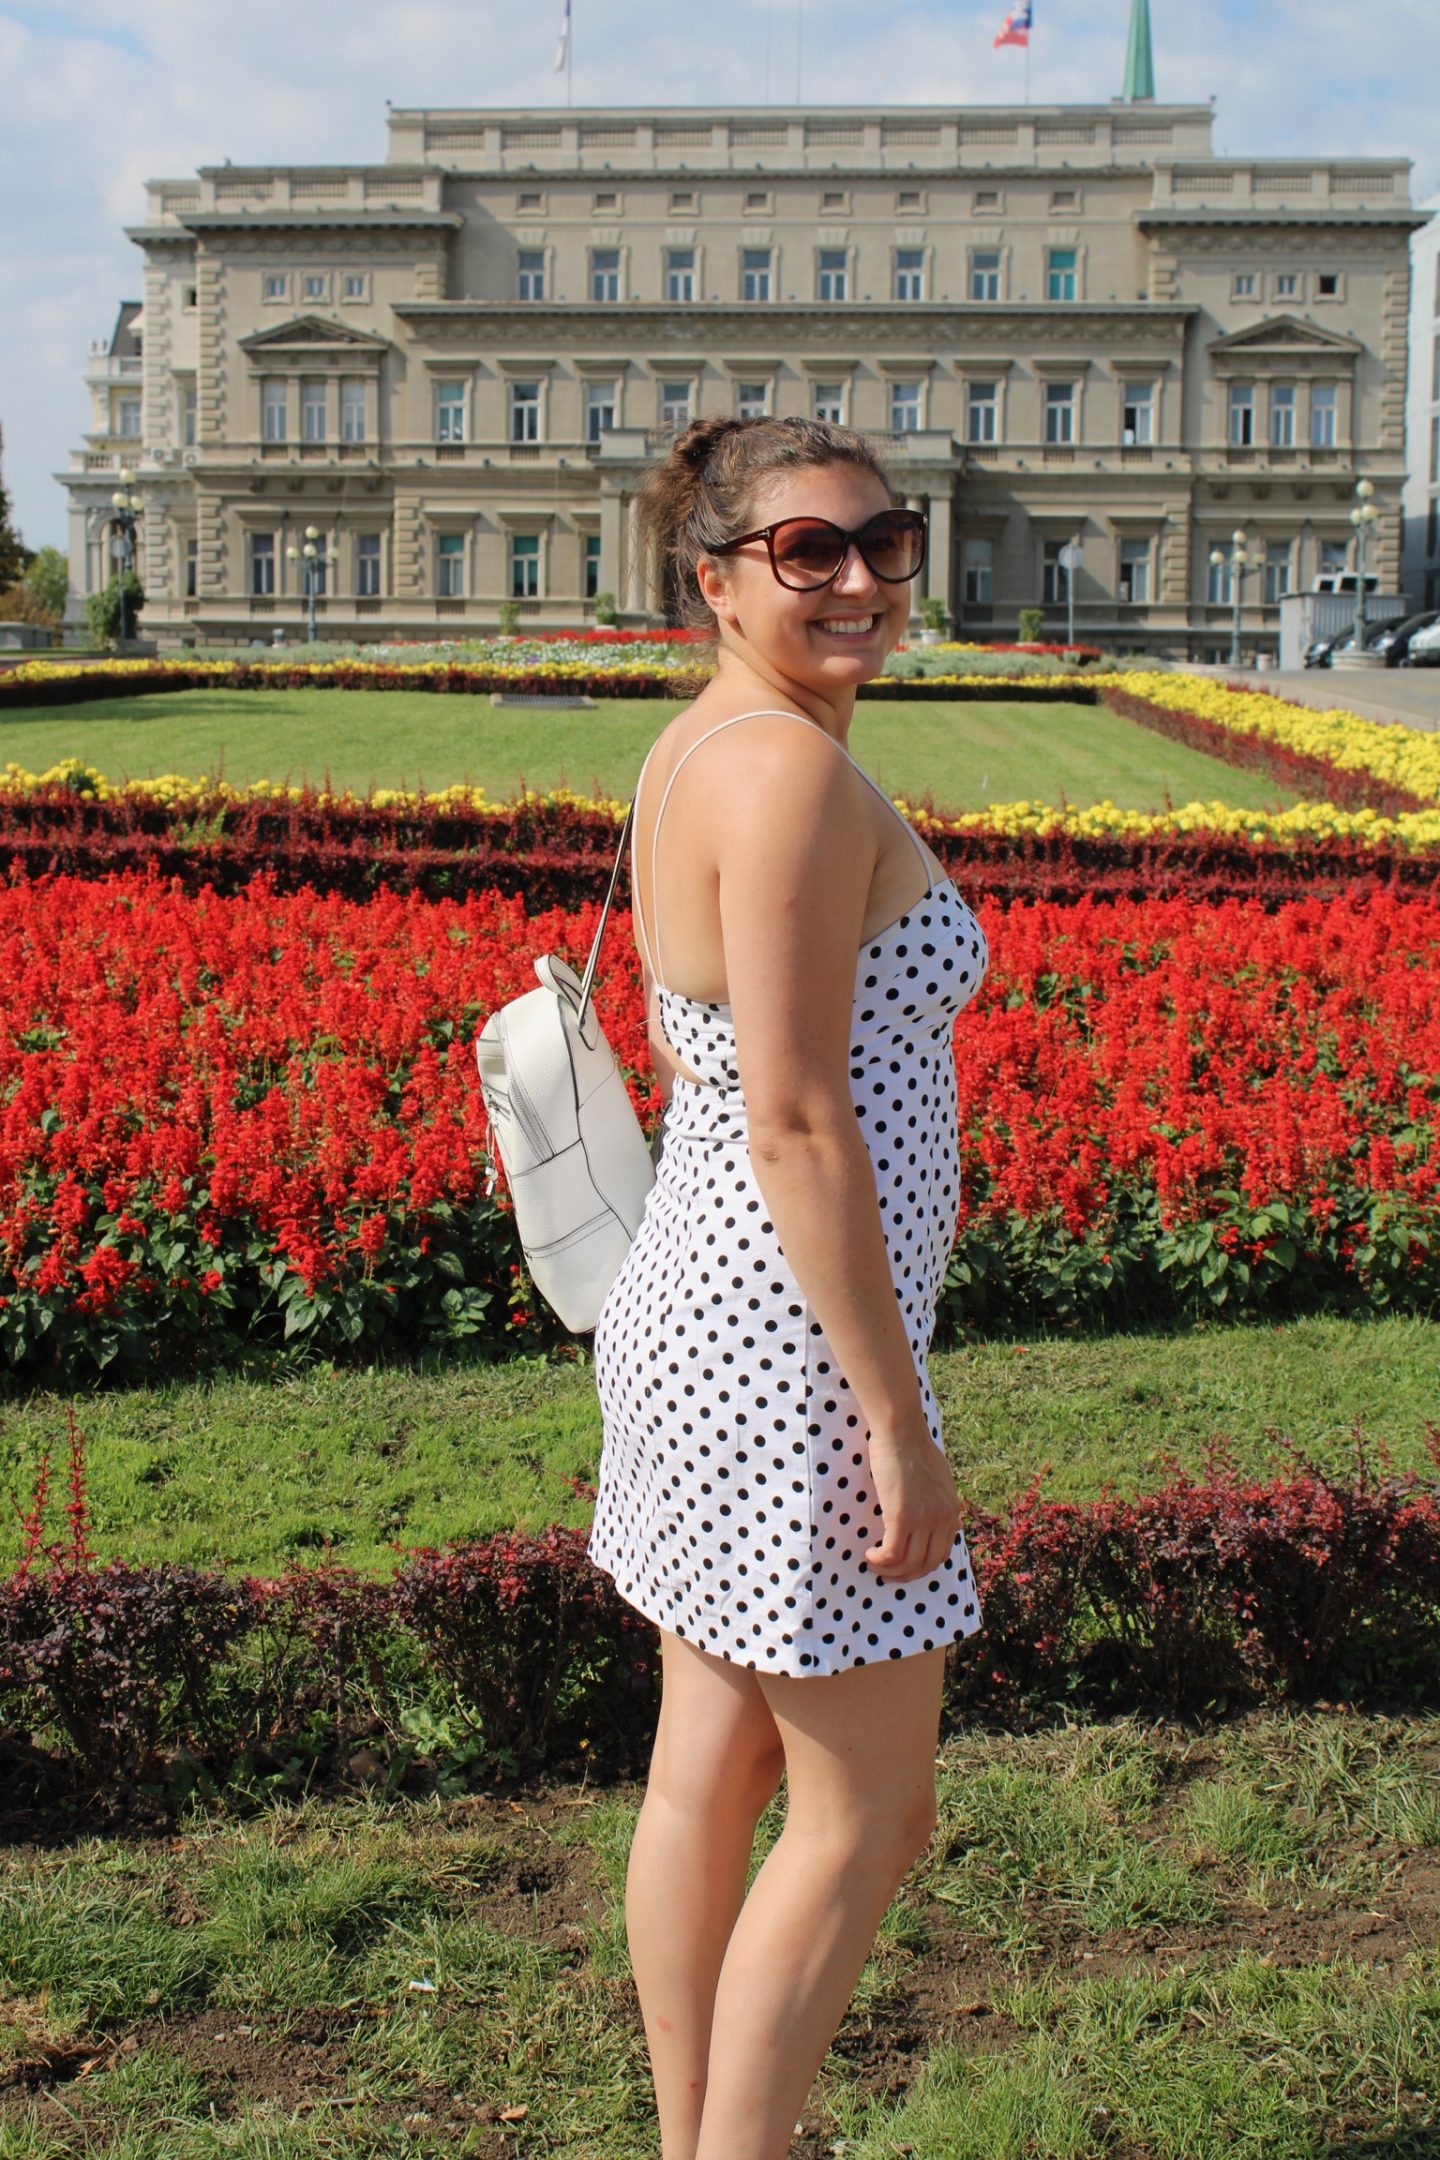 cheap european city break - Nell wearing a white polkadot dress, stood in front of flowers and an impressive building whilst on holiday in Belgrade